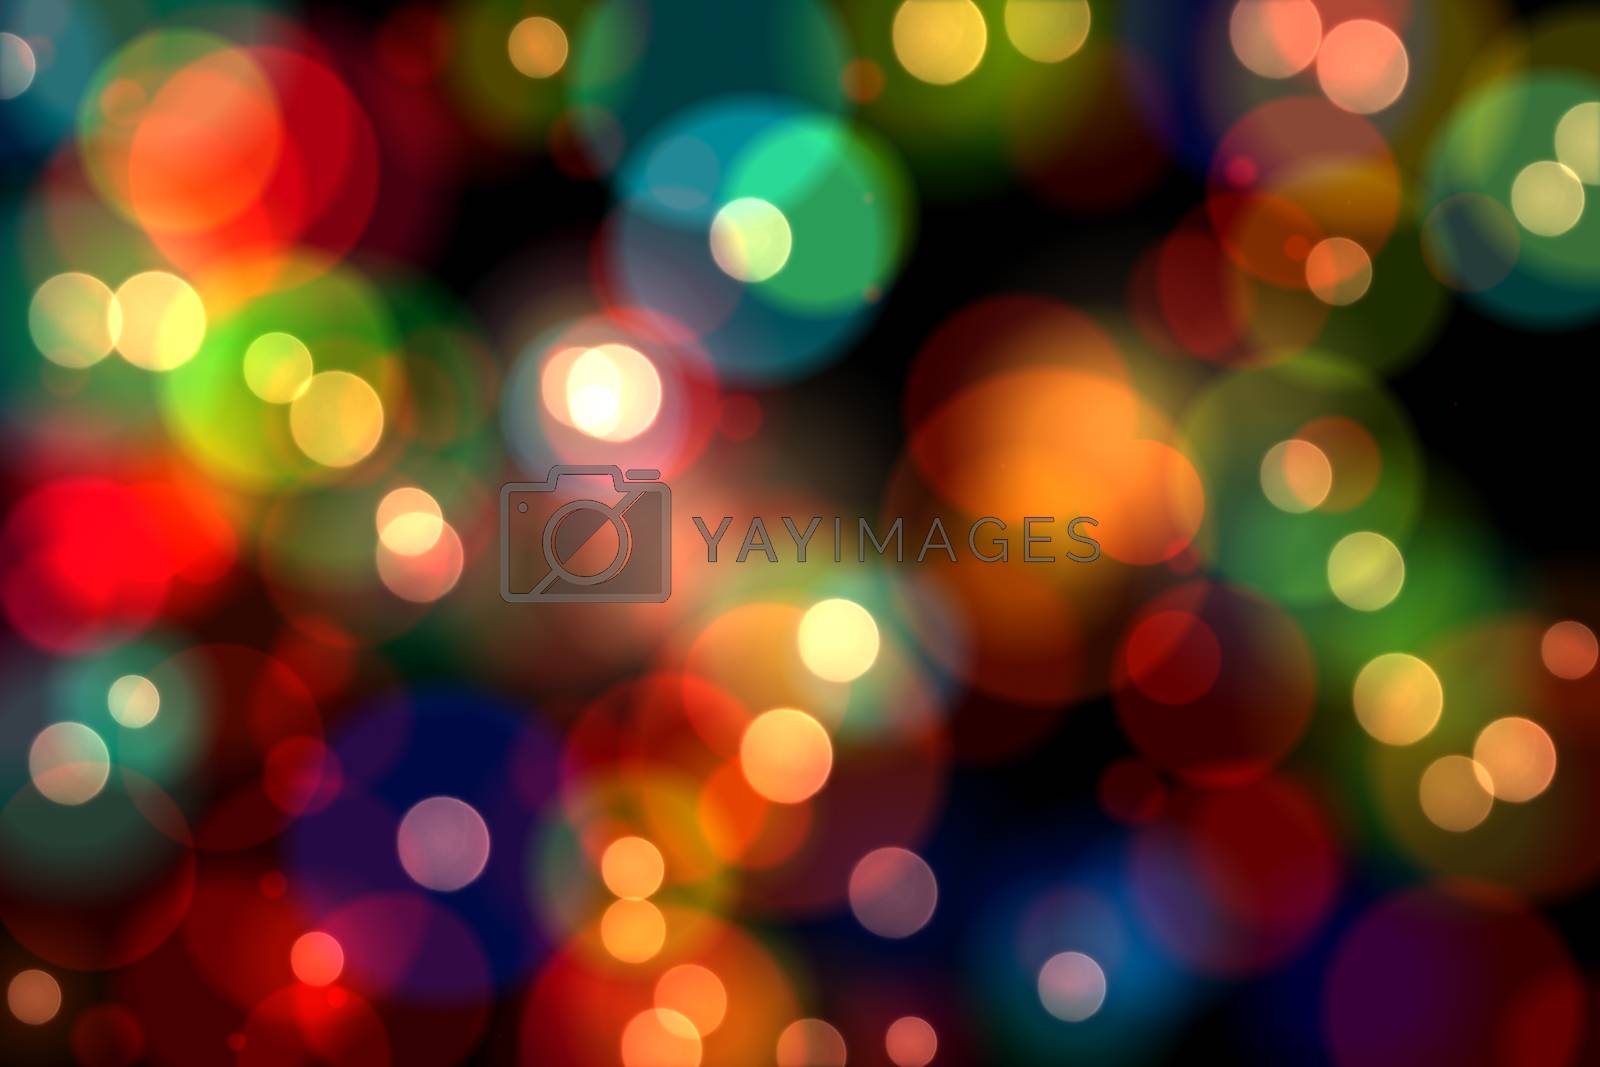 Royalty free image of Colourful glowing dots on black by Wavebreakmedia